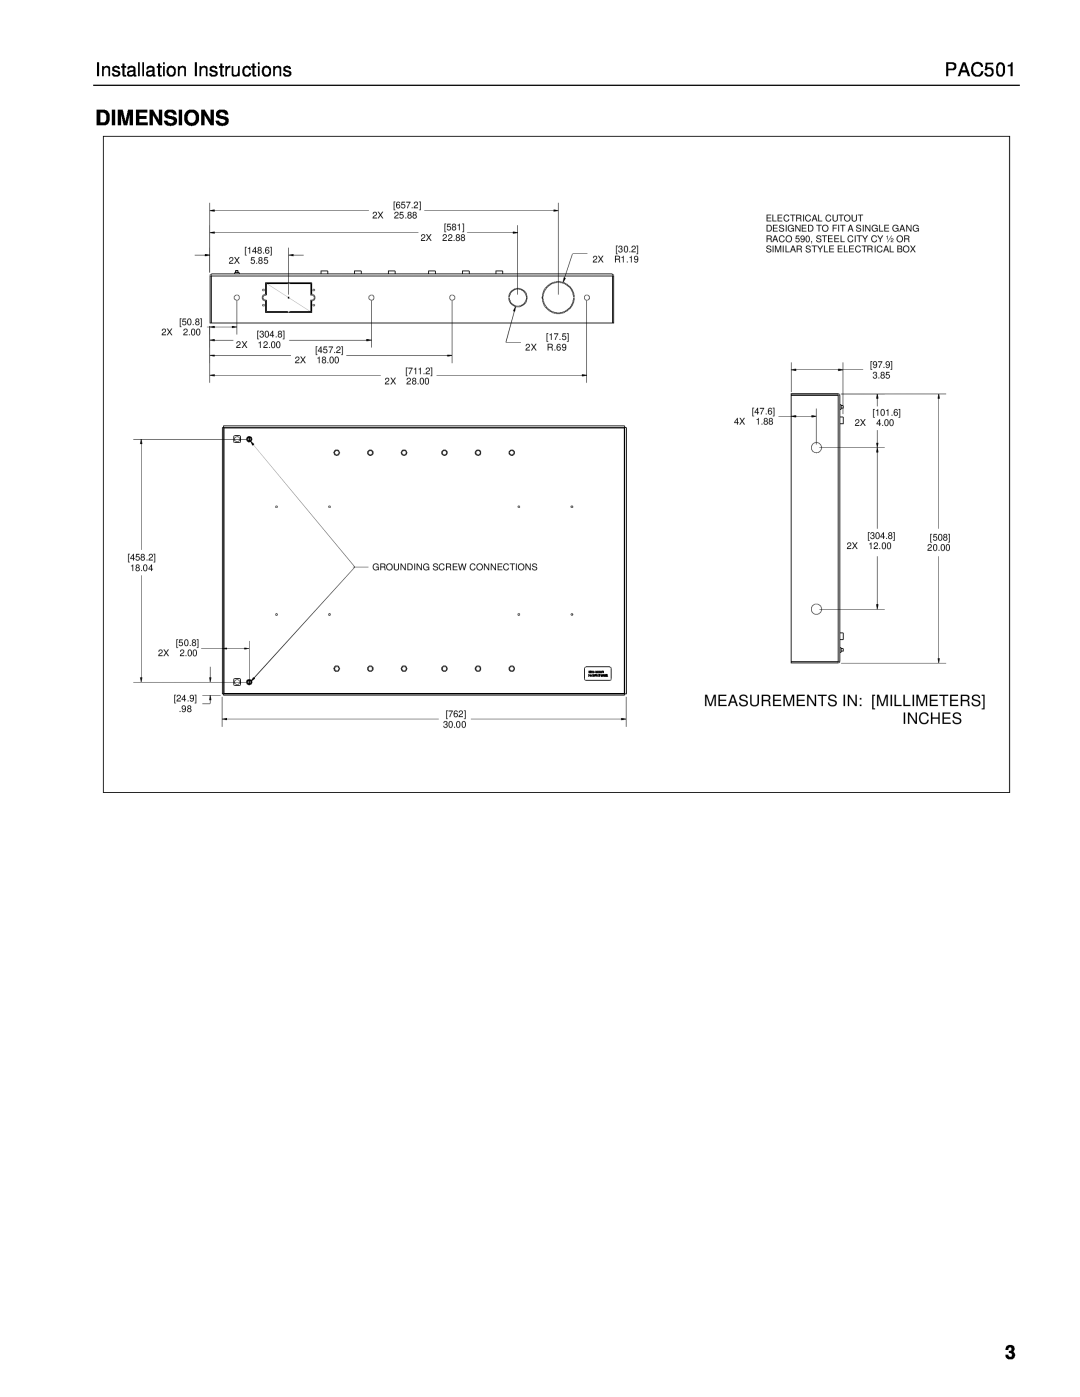 Chief Manufacturing PAC501 installation instructions Dimensions, Installation Instructions, Measurements In Millimeters 